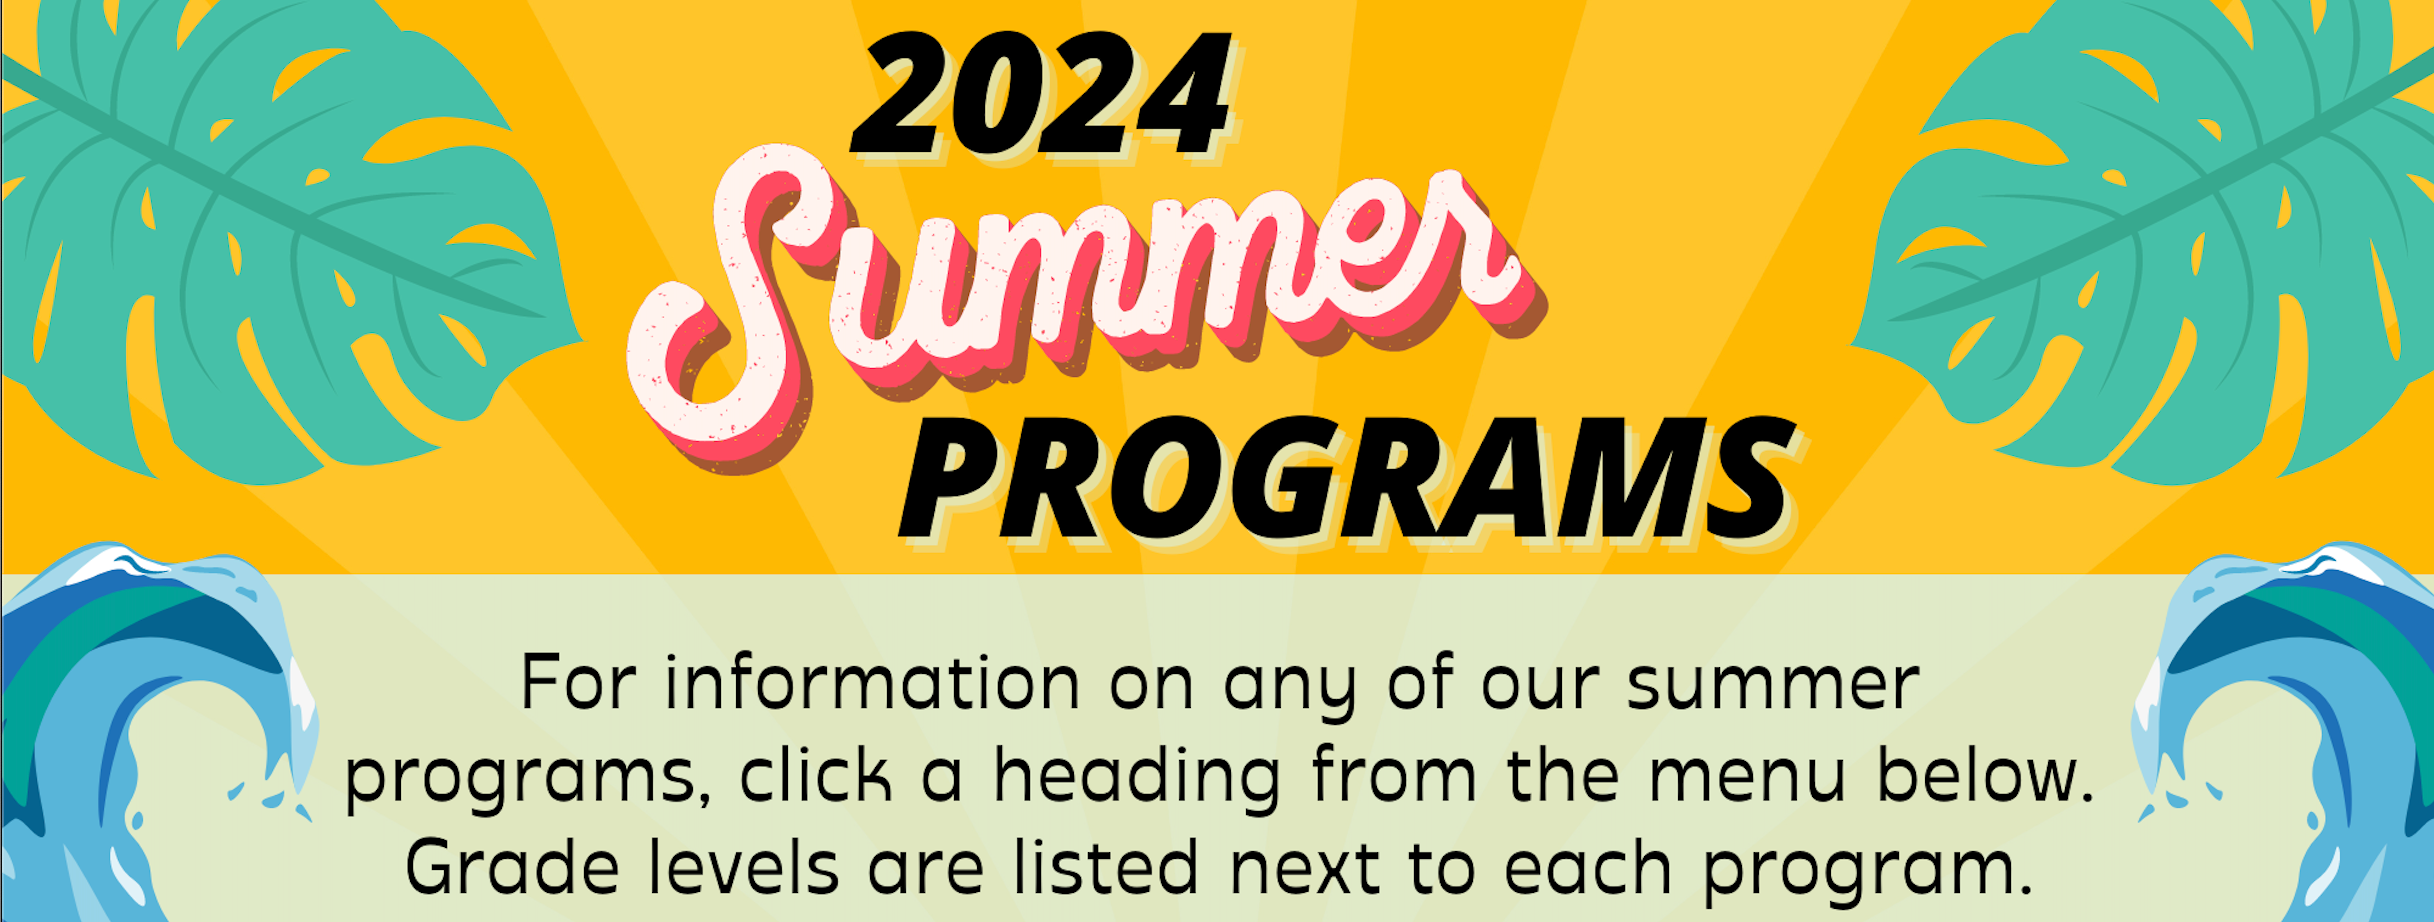 2024 Summer Programs graphic of yellow rays of sun, blue and white capped waves and green tropical leaves to frame it all.   For information on any of our summer programs, click a heading from the menu below.  Grade levels are listed next to each program.